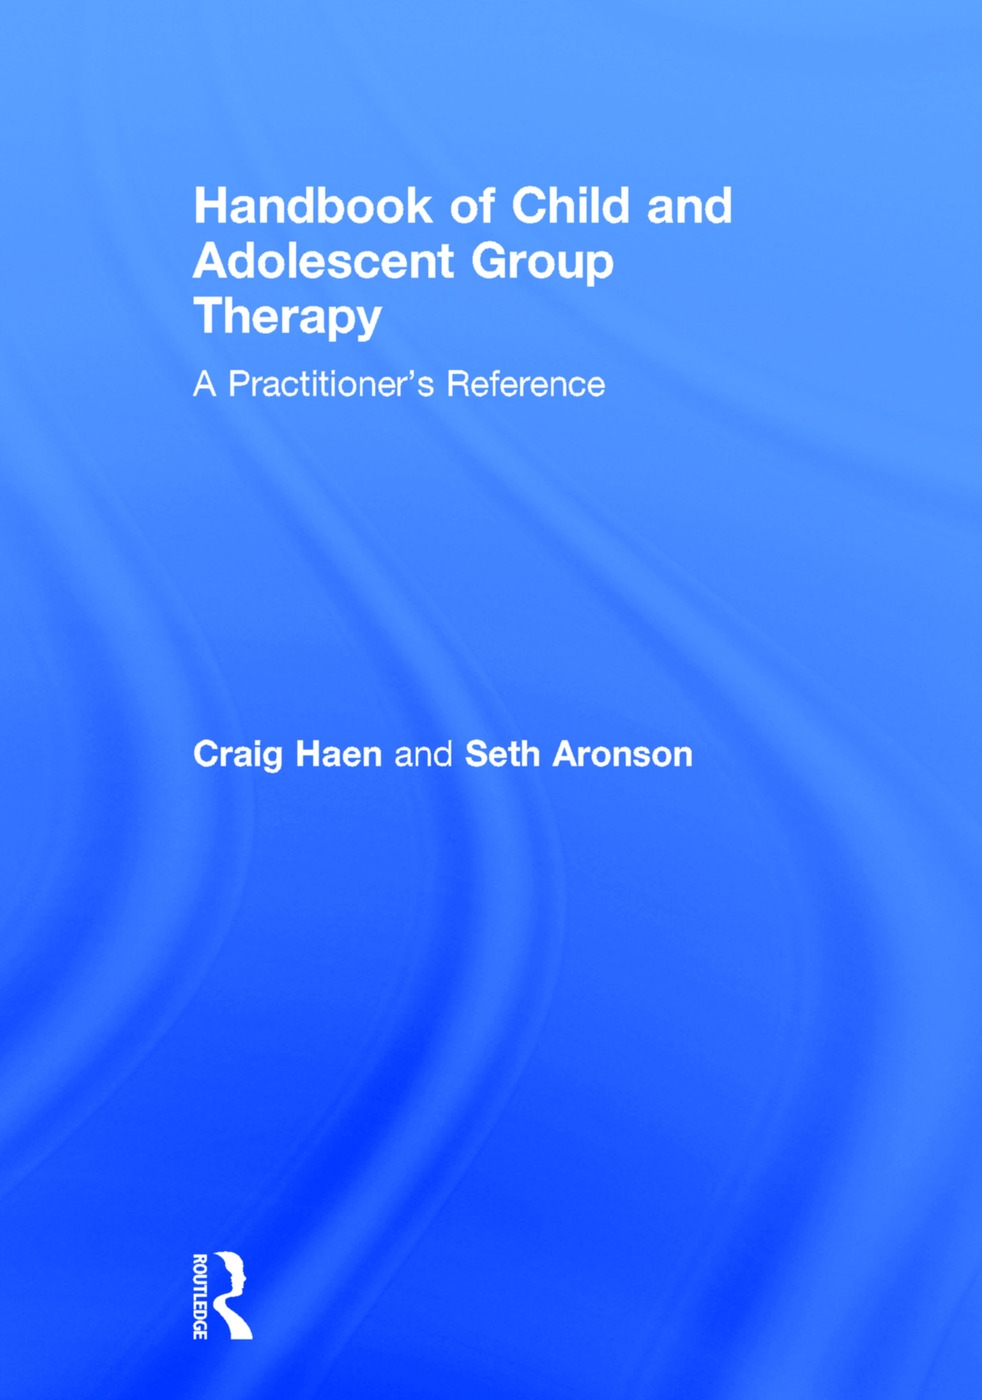 Handbook of Child and Adolescent Group Therapy: A Practitioner’s Reference